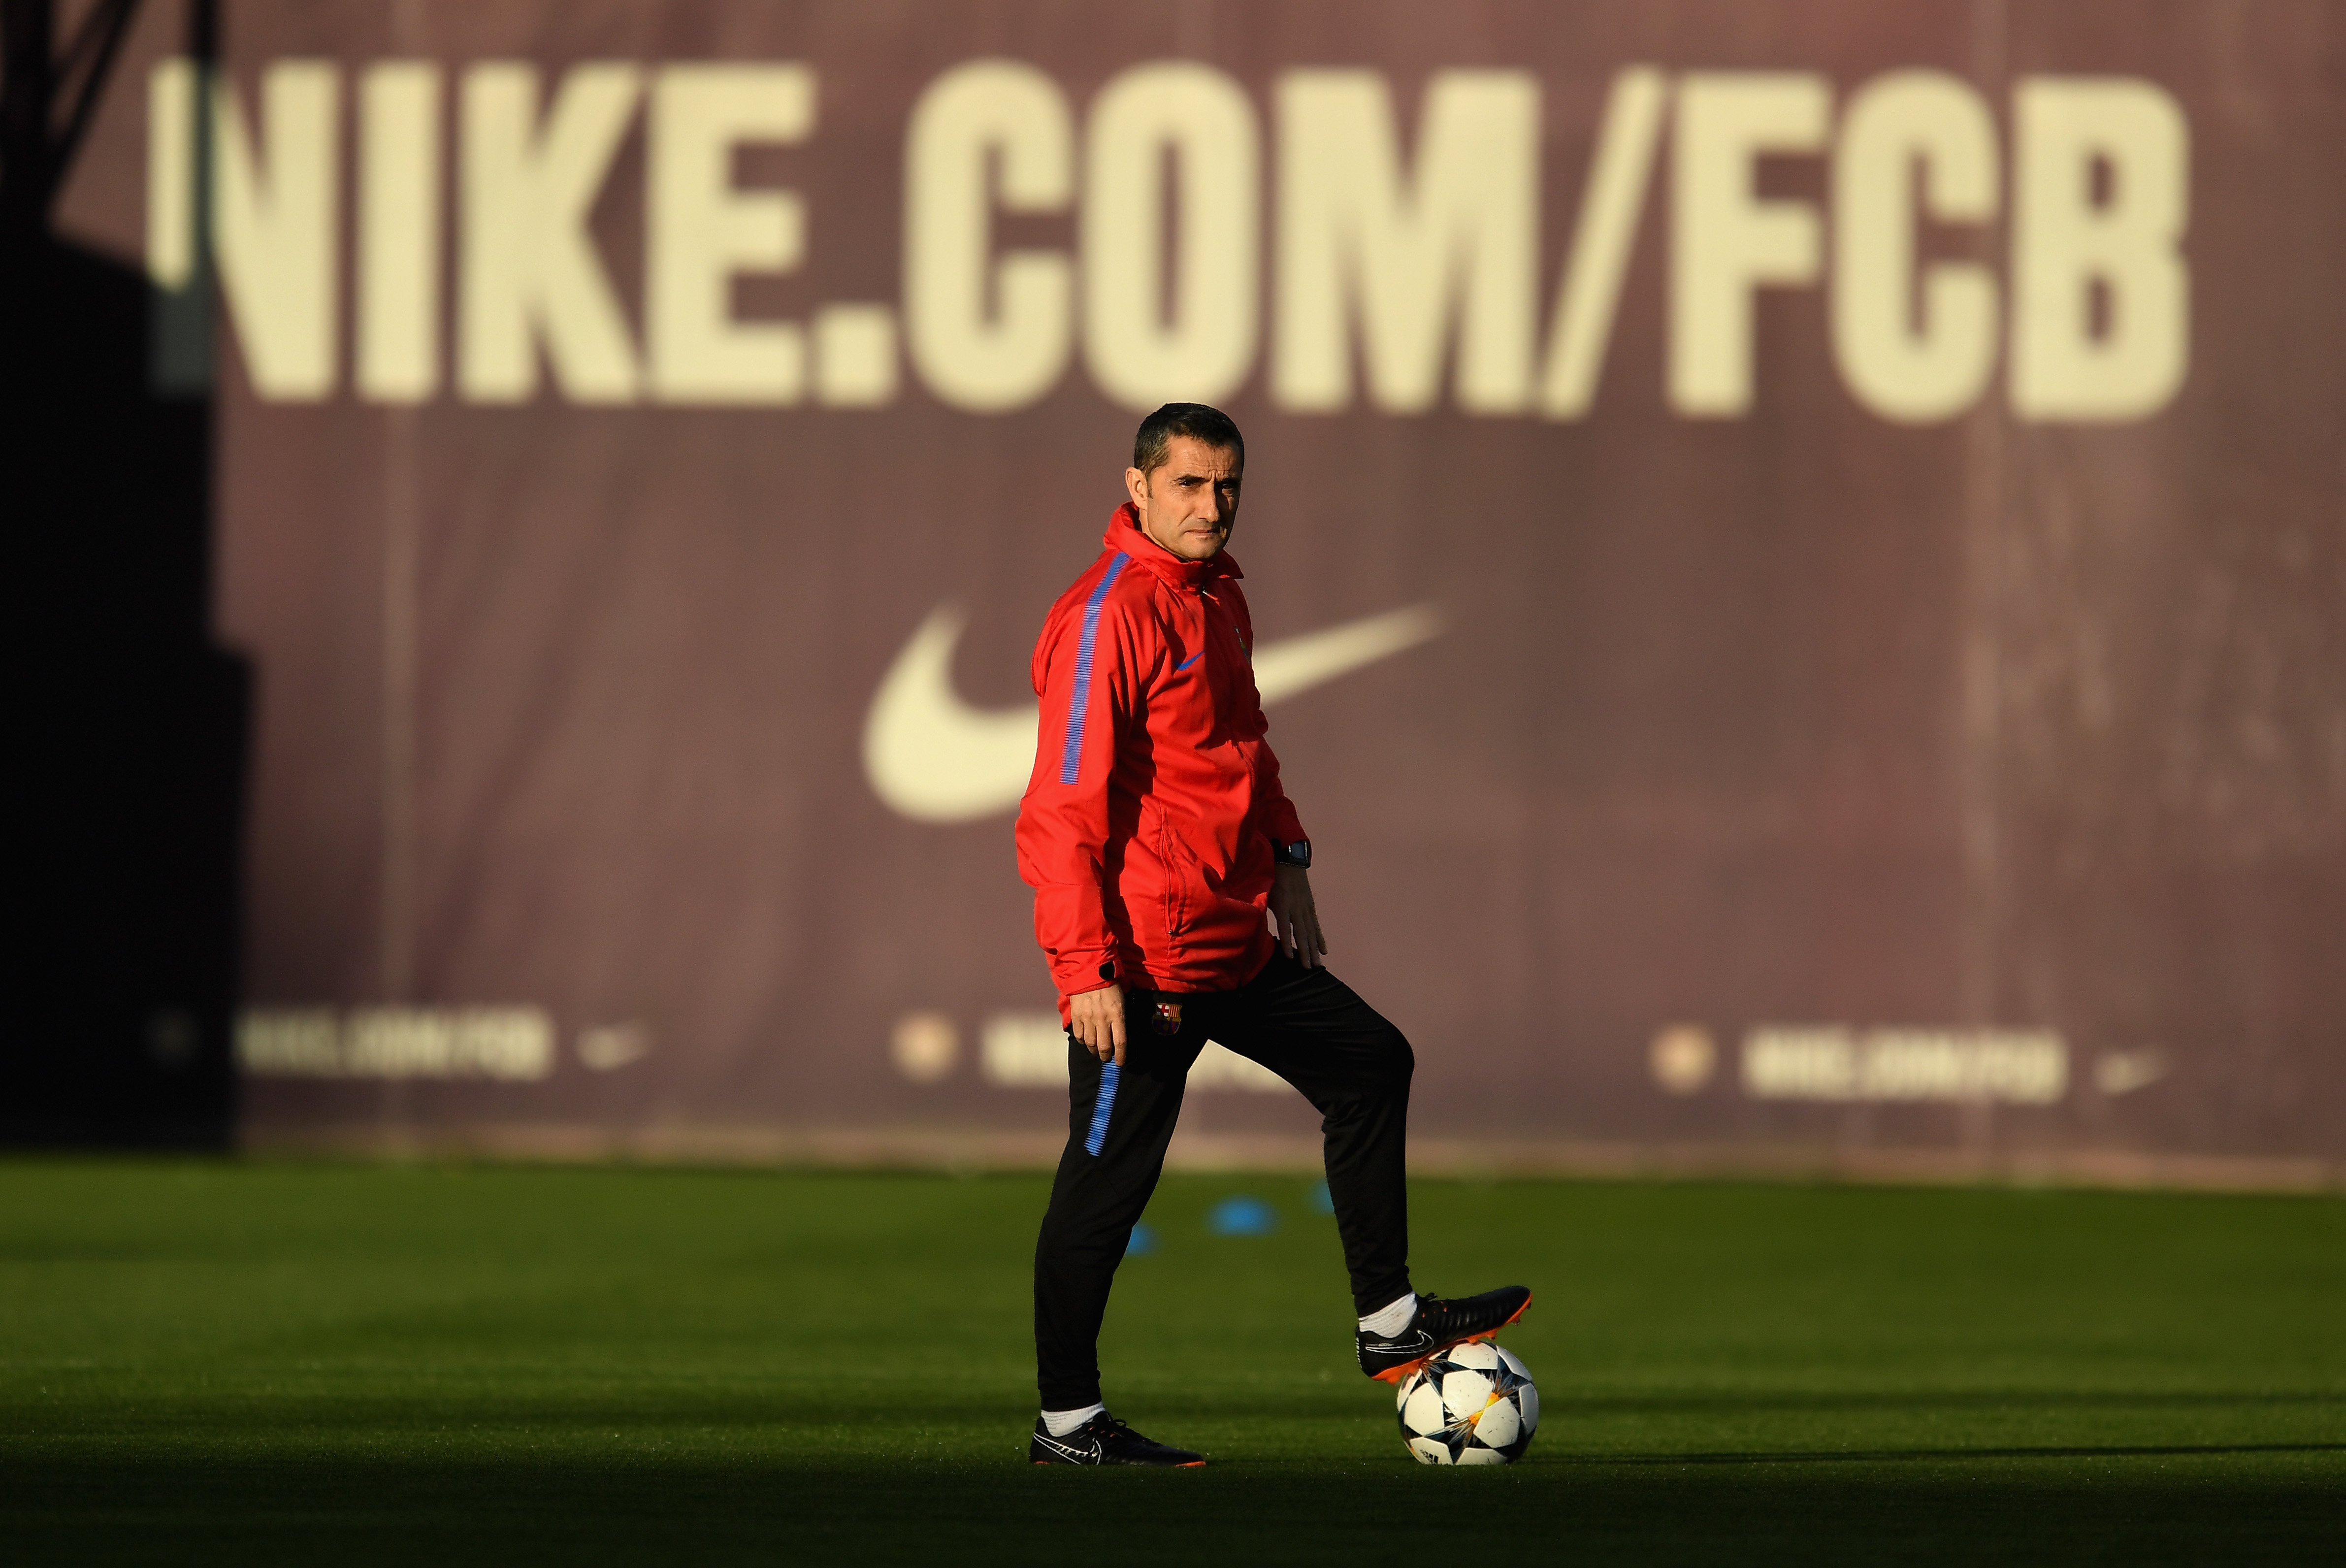 BARCELONA, SPAIN - MARCH 13:  Manager of Barcelona, Ernesto Valverde during a Barcelona during a Barcelona training session ahead of their UEFA Champions League Round of 16 match against Chelsea at Nou Camp on March 13, 2018 in Barcelona, Spain.  (Photo by David Ramos/Getty Images)